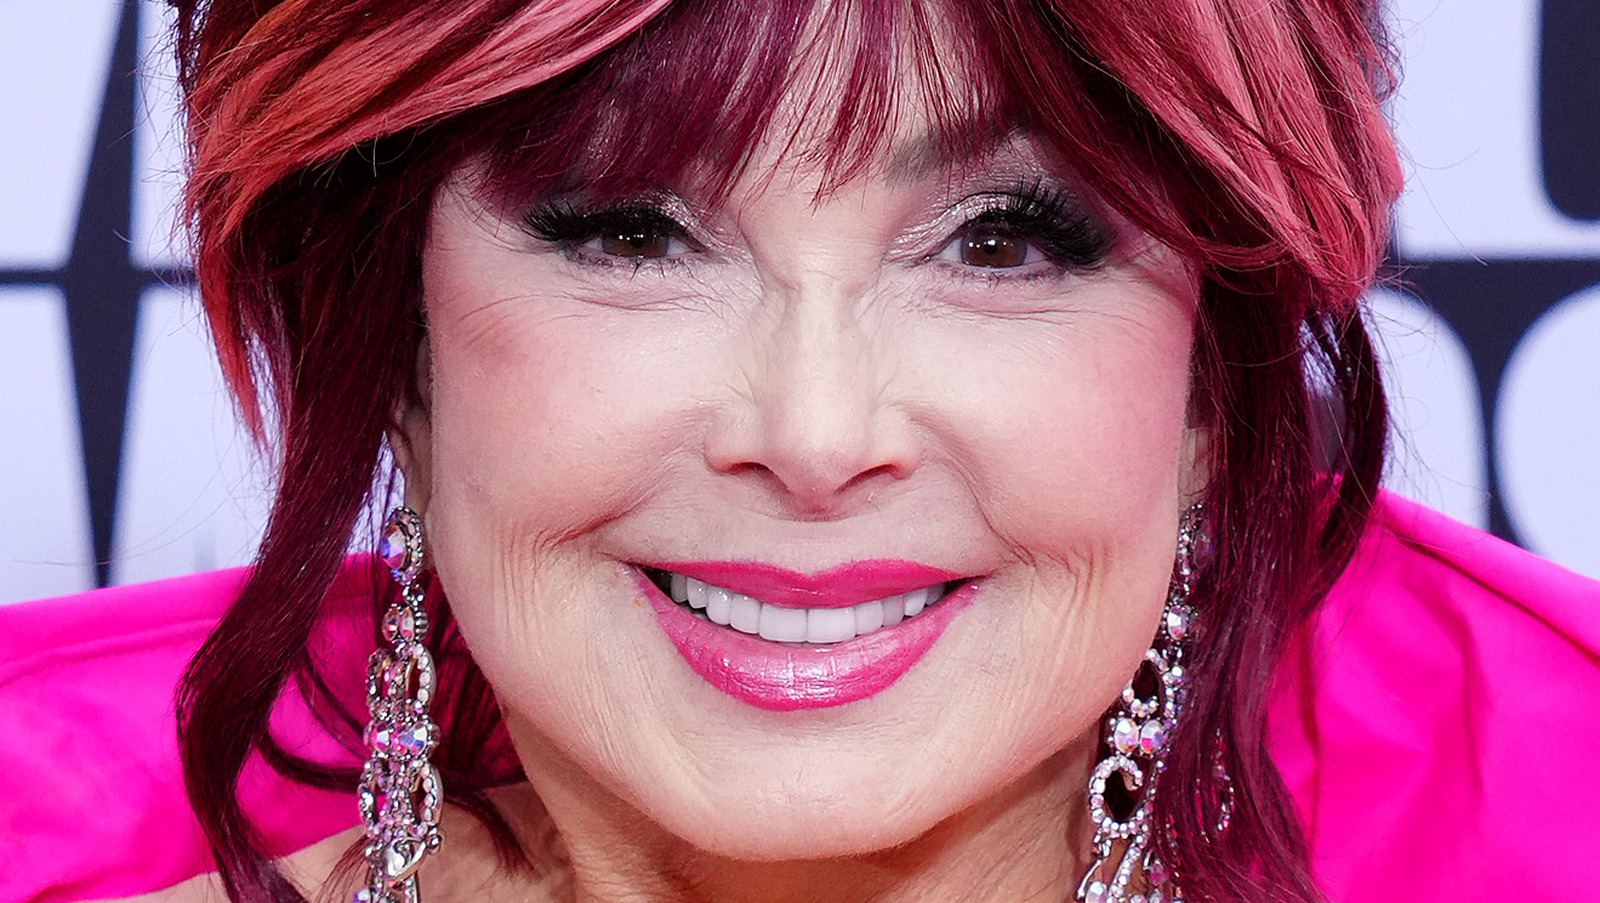 What We Know About Naomi Judd’s Memorial Service